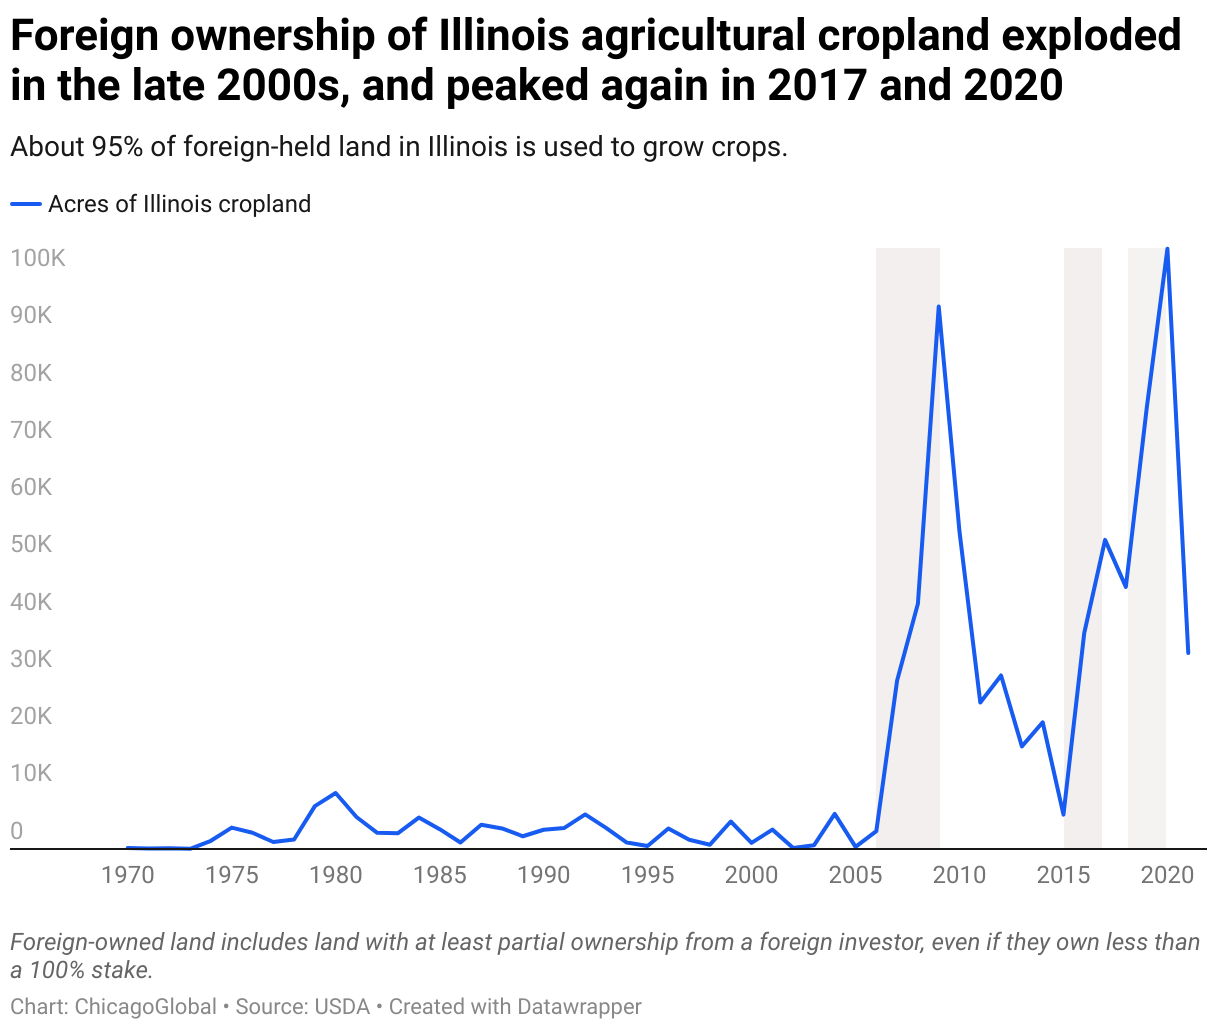 Two side-by-side timelines show purchases of Illinois cropland and US cropland. There are surges in purchases of cropland in the US in the 20th century, but Illinois purchases only started to boom around 2007. 